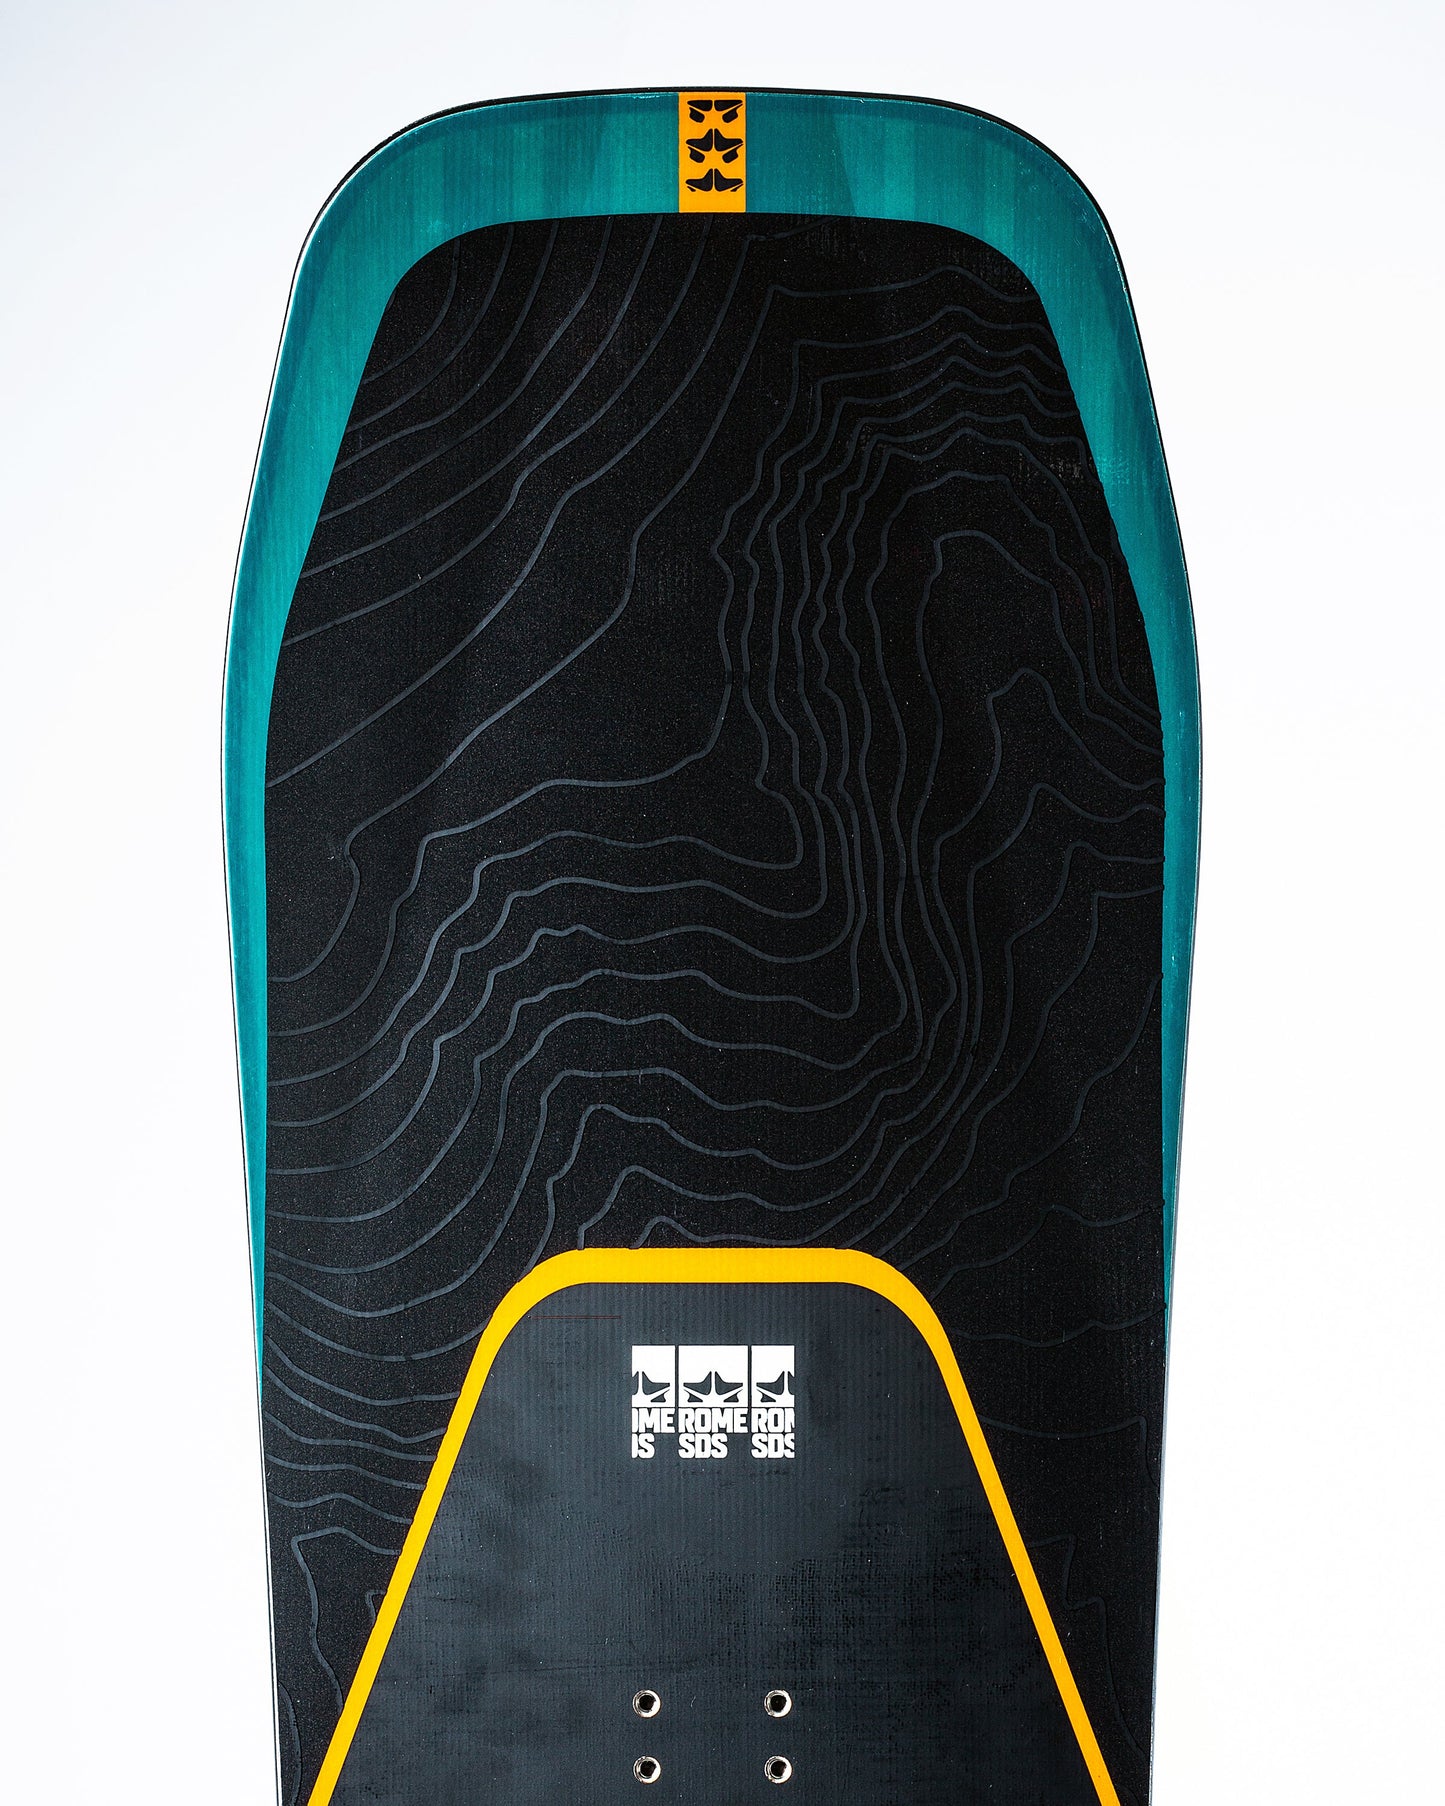 Ravine Select 2023 best freeride snowboard product photo close up nose shot in studio